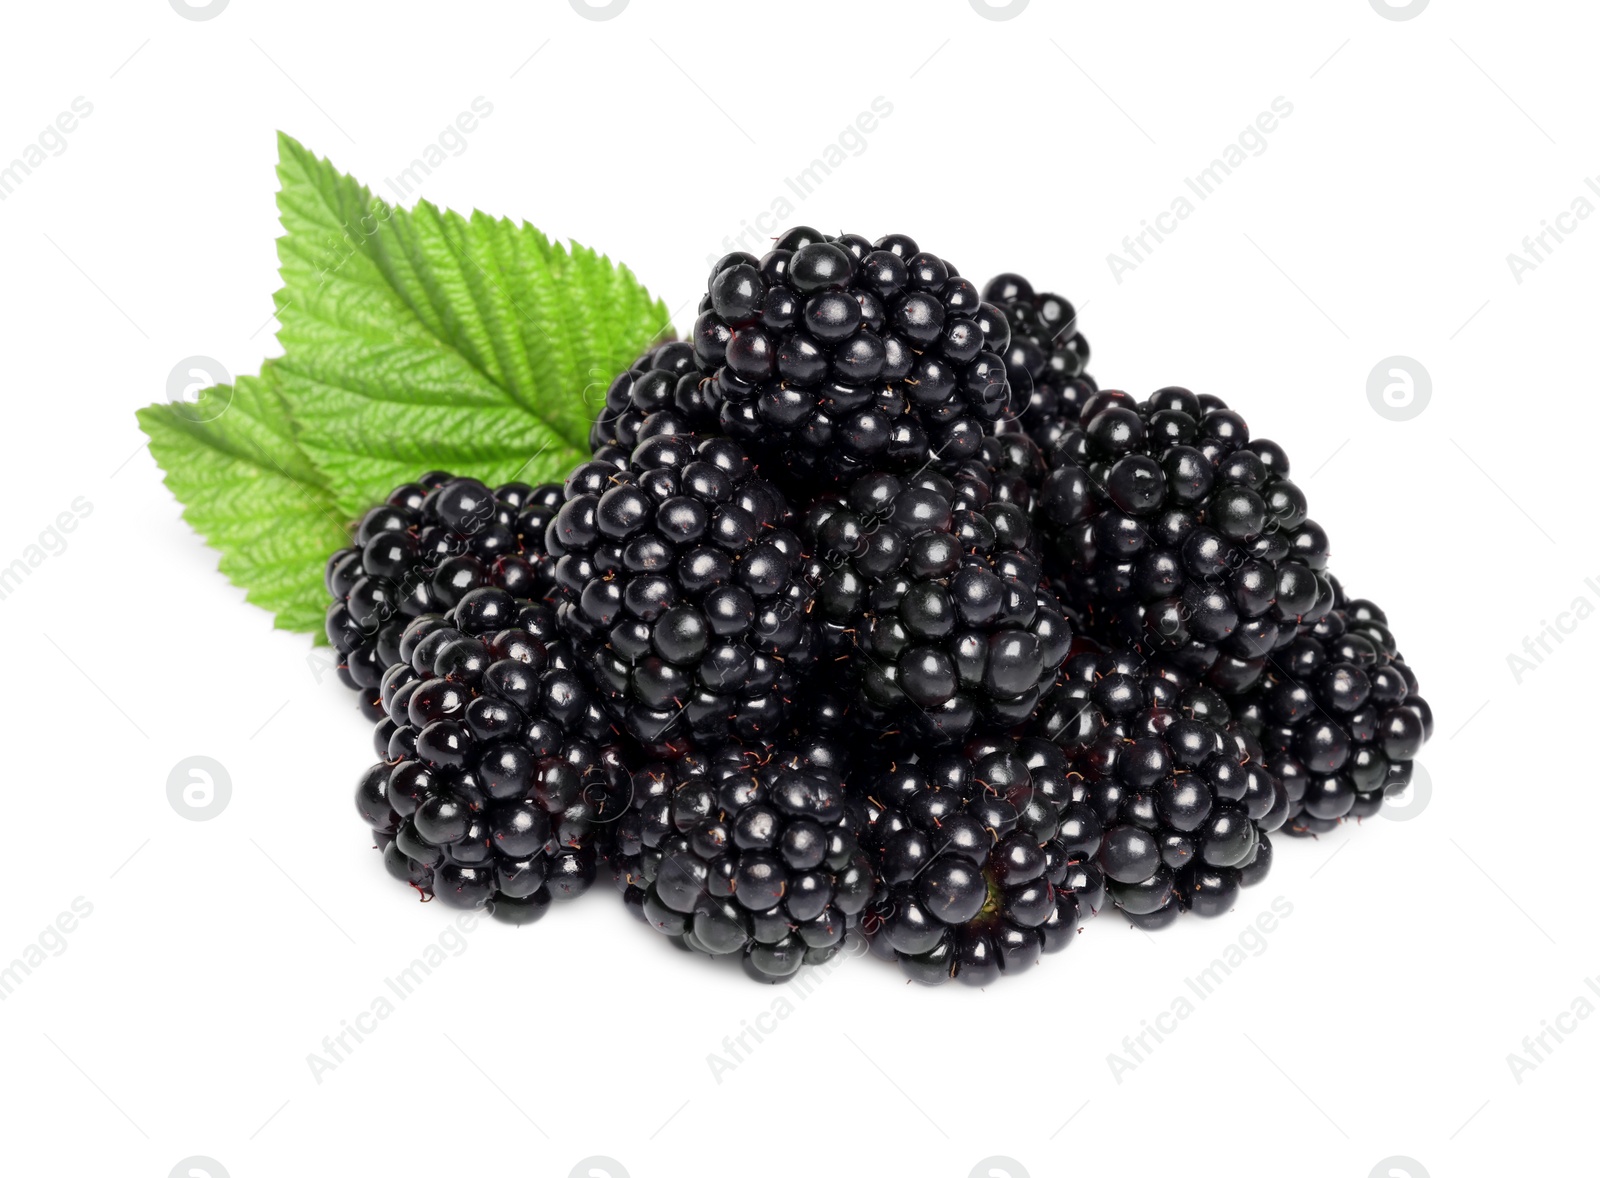 Photo of Pile of ripe blackberries with green leaves isolated on white